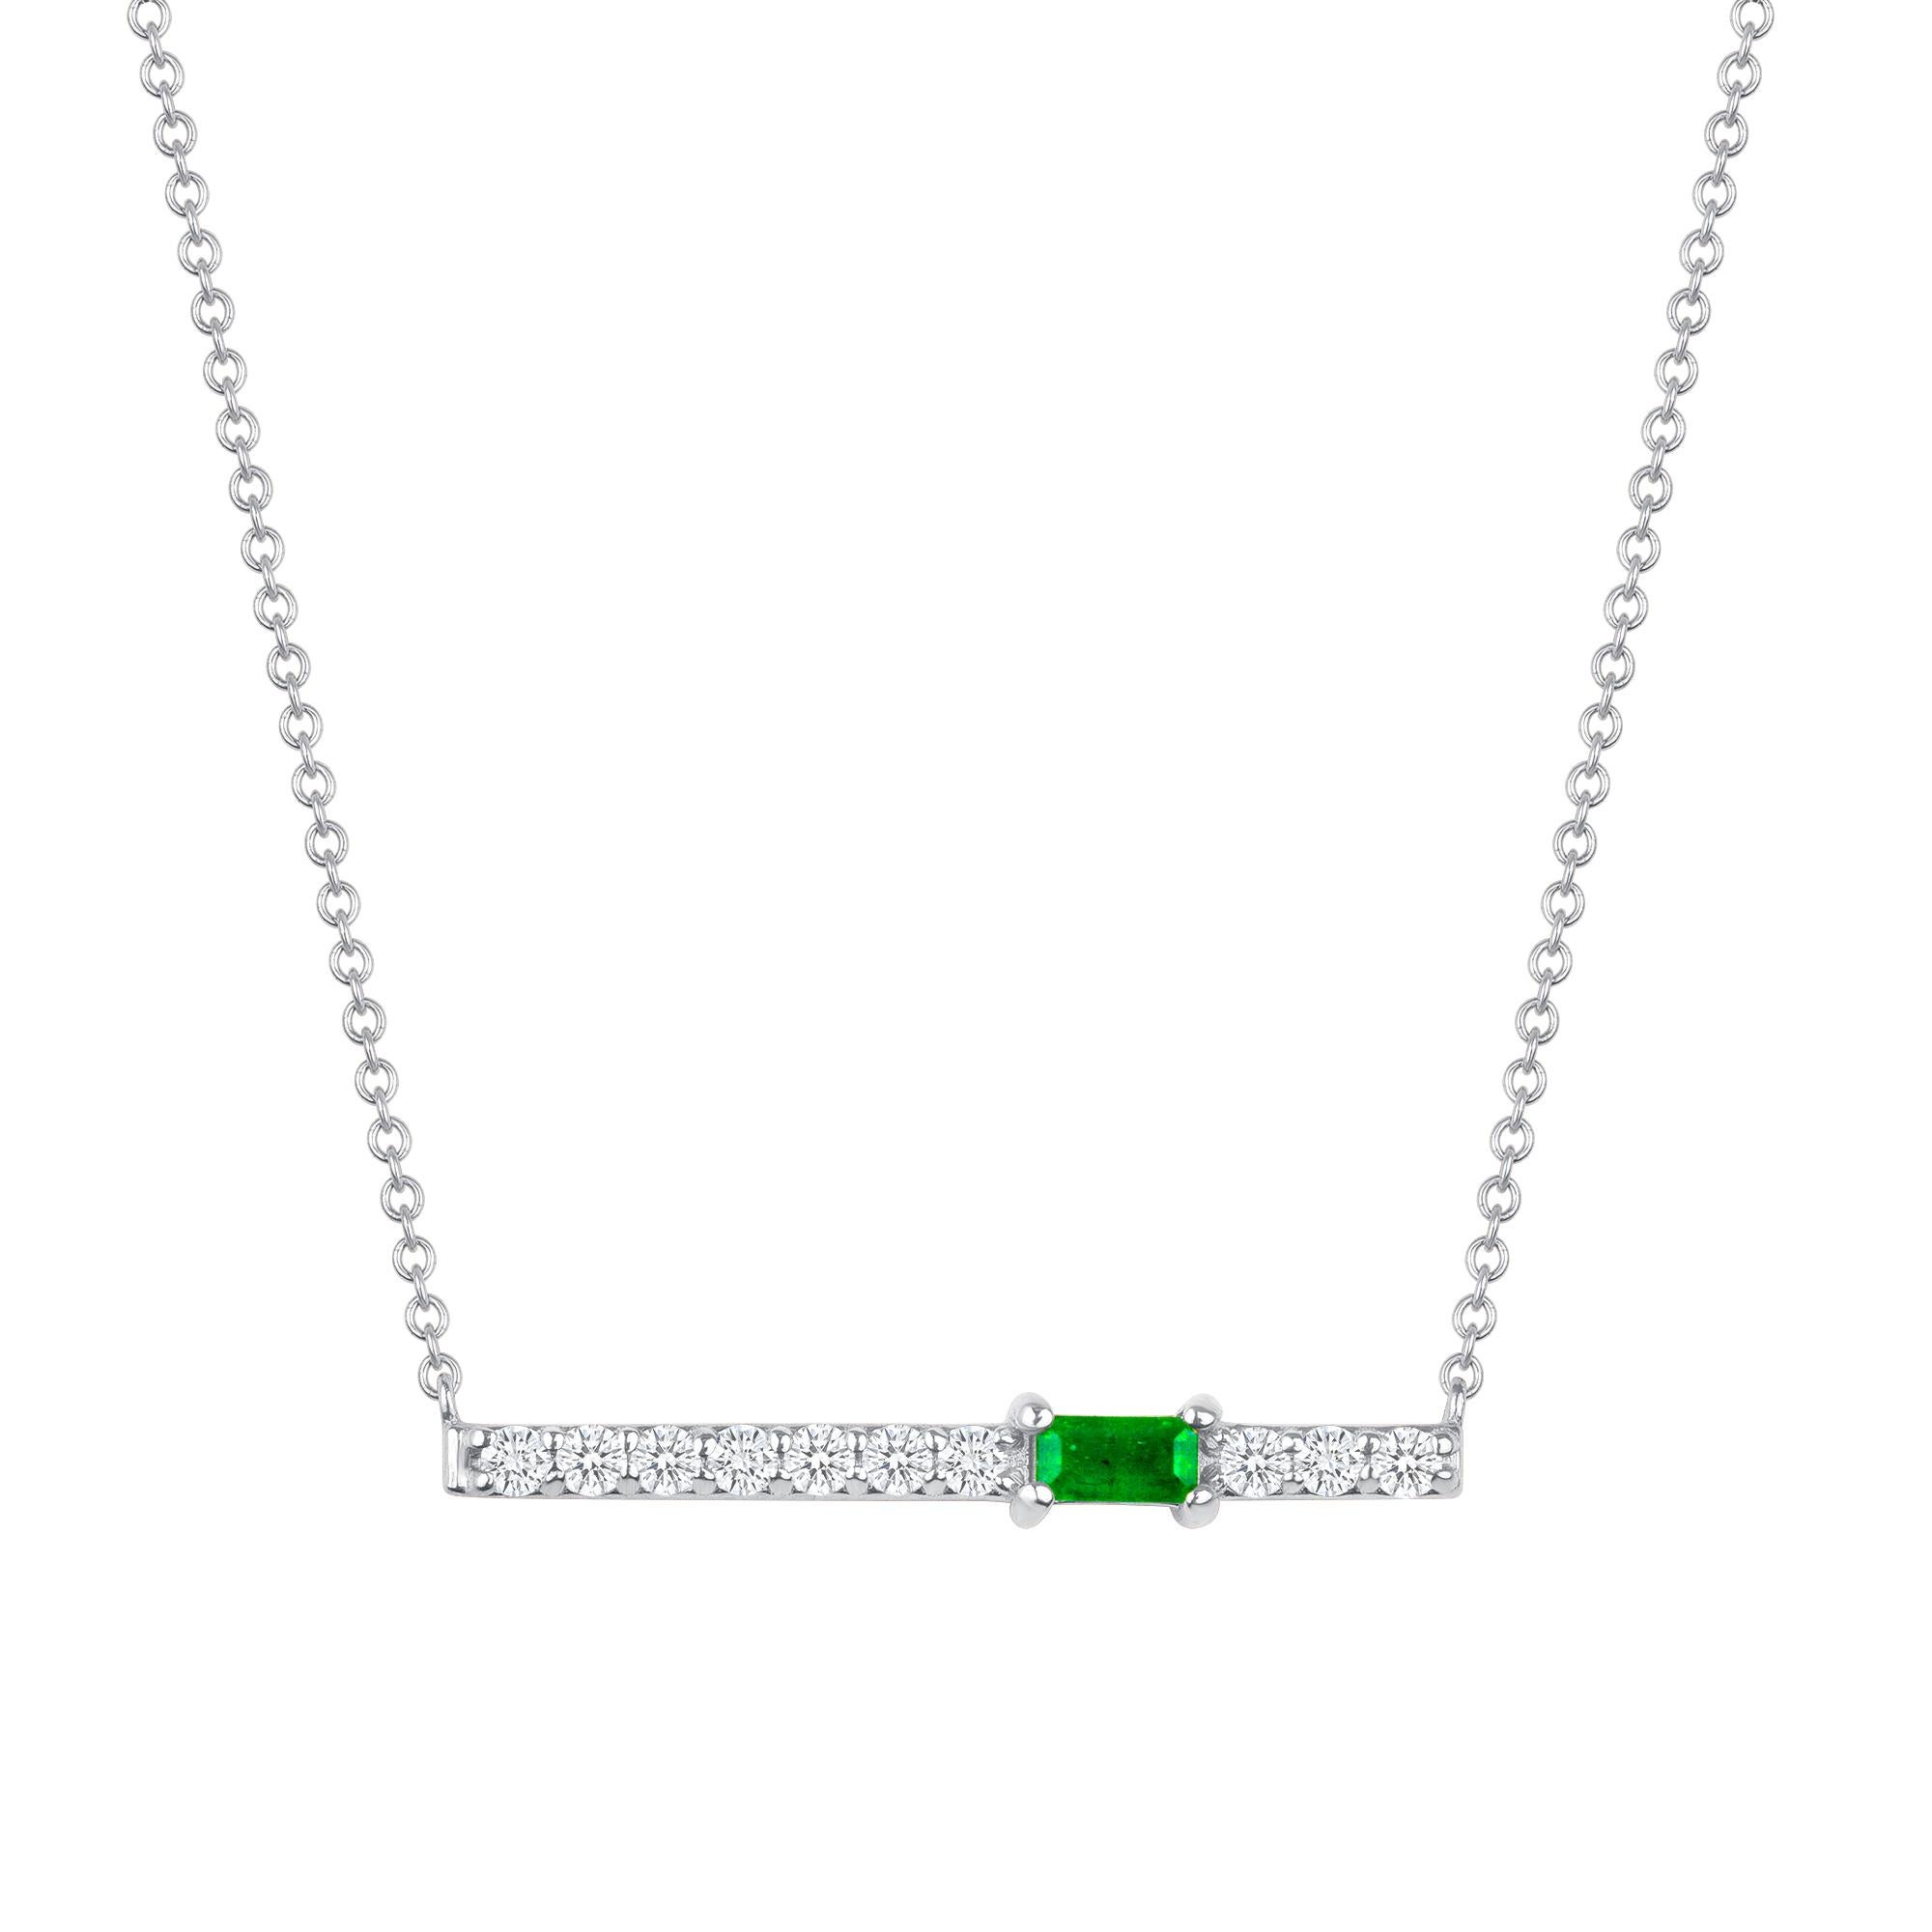 Crafted in 14K gold, round glistening diamonds enclose a baguette emerald stone on this contemporary bar pendant. This stunning necklace is a modern piece that sits elegantly above the collarbone making it the perfect necklace for layering or just